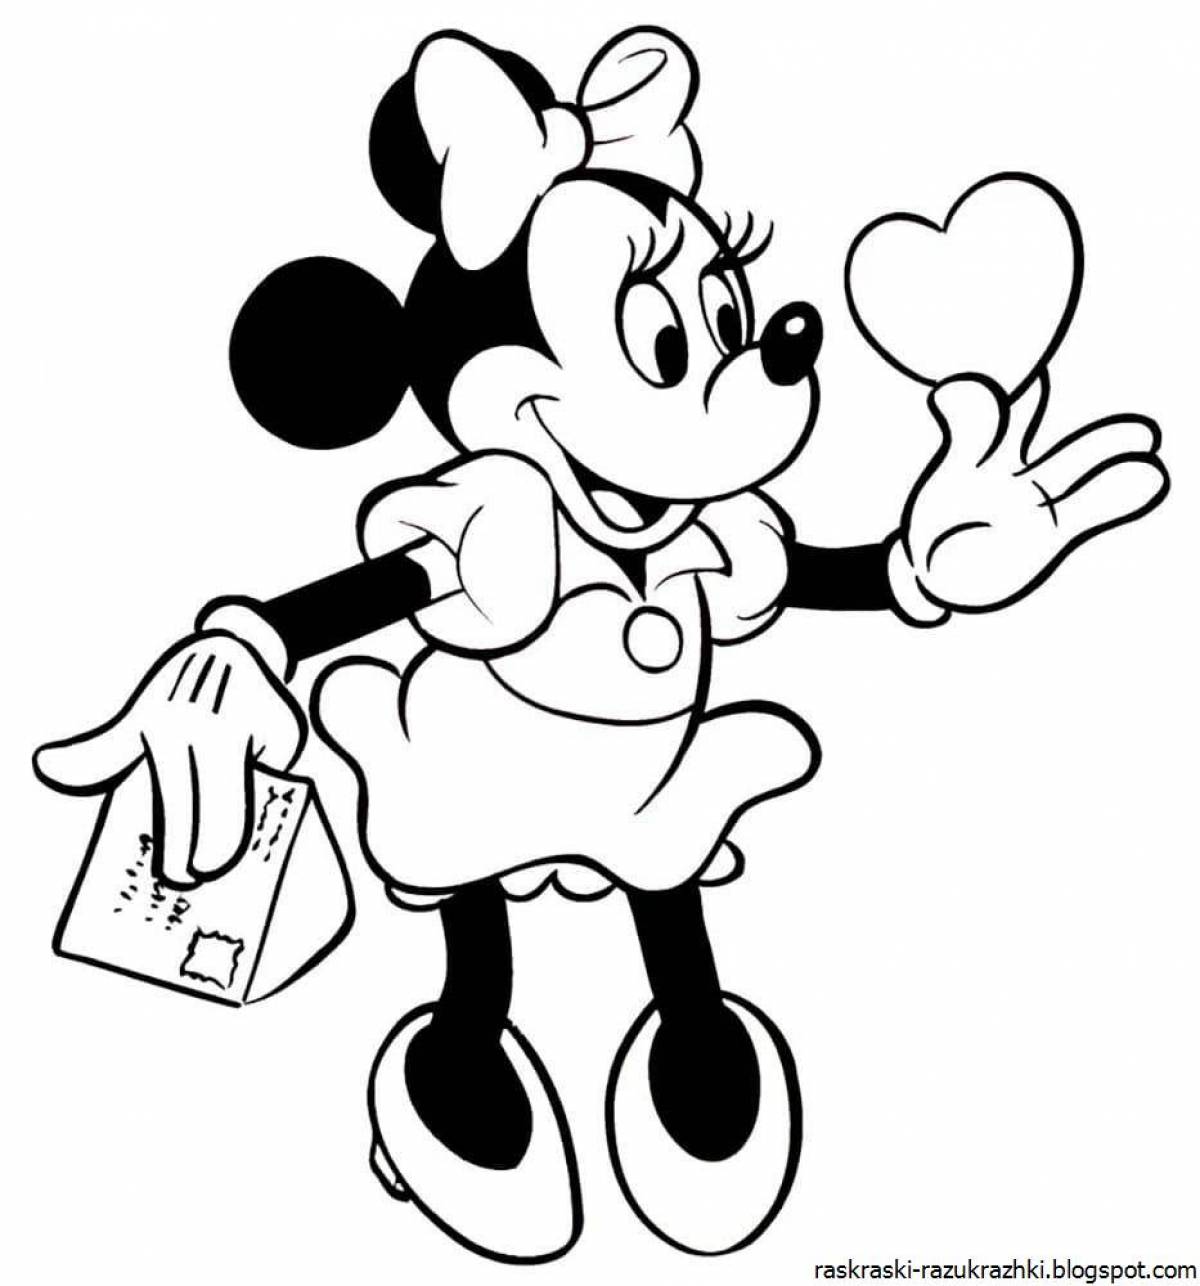 Mickey mouse coloring page